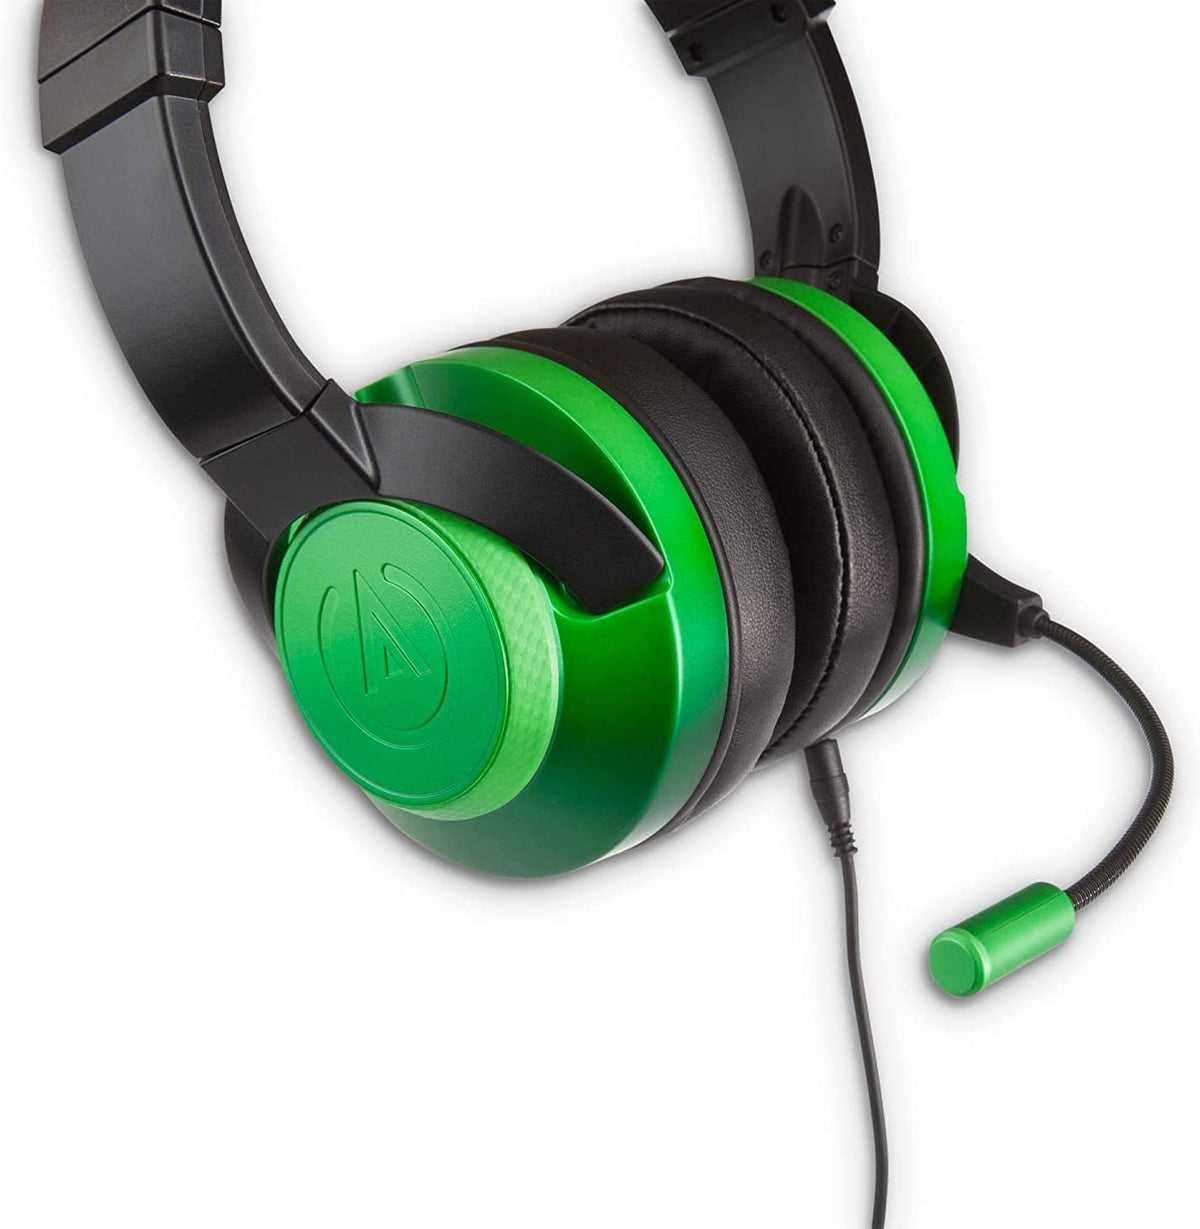 PowerA Wired Gaming Headset - Emerald Fade Gamesellers.nl